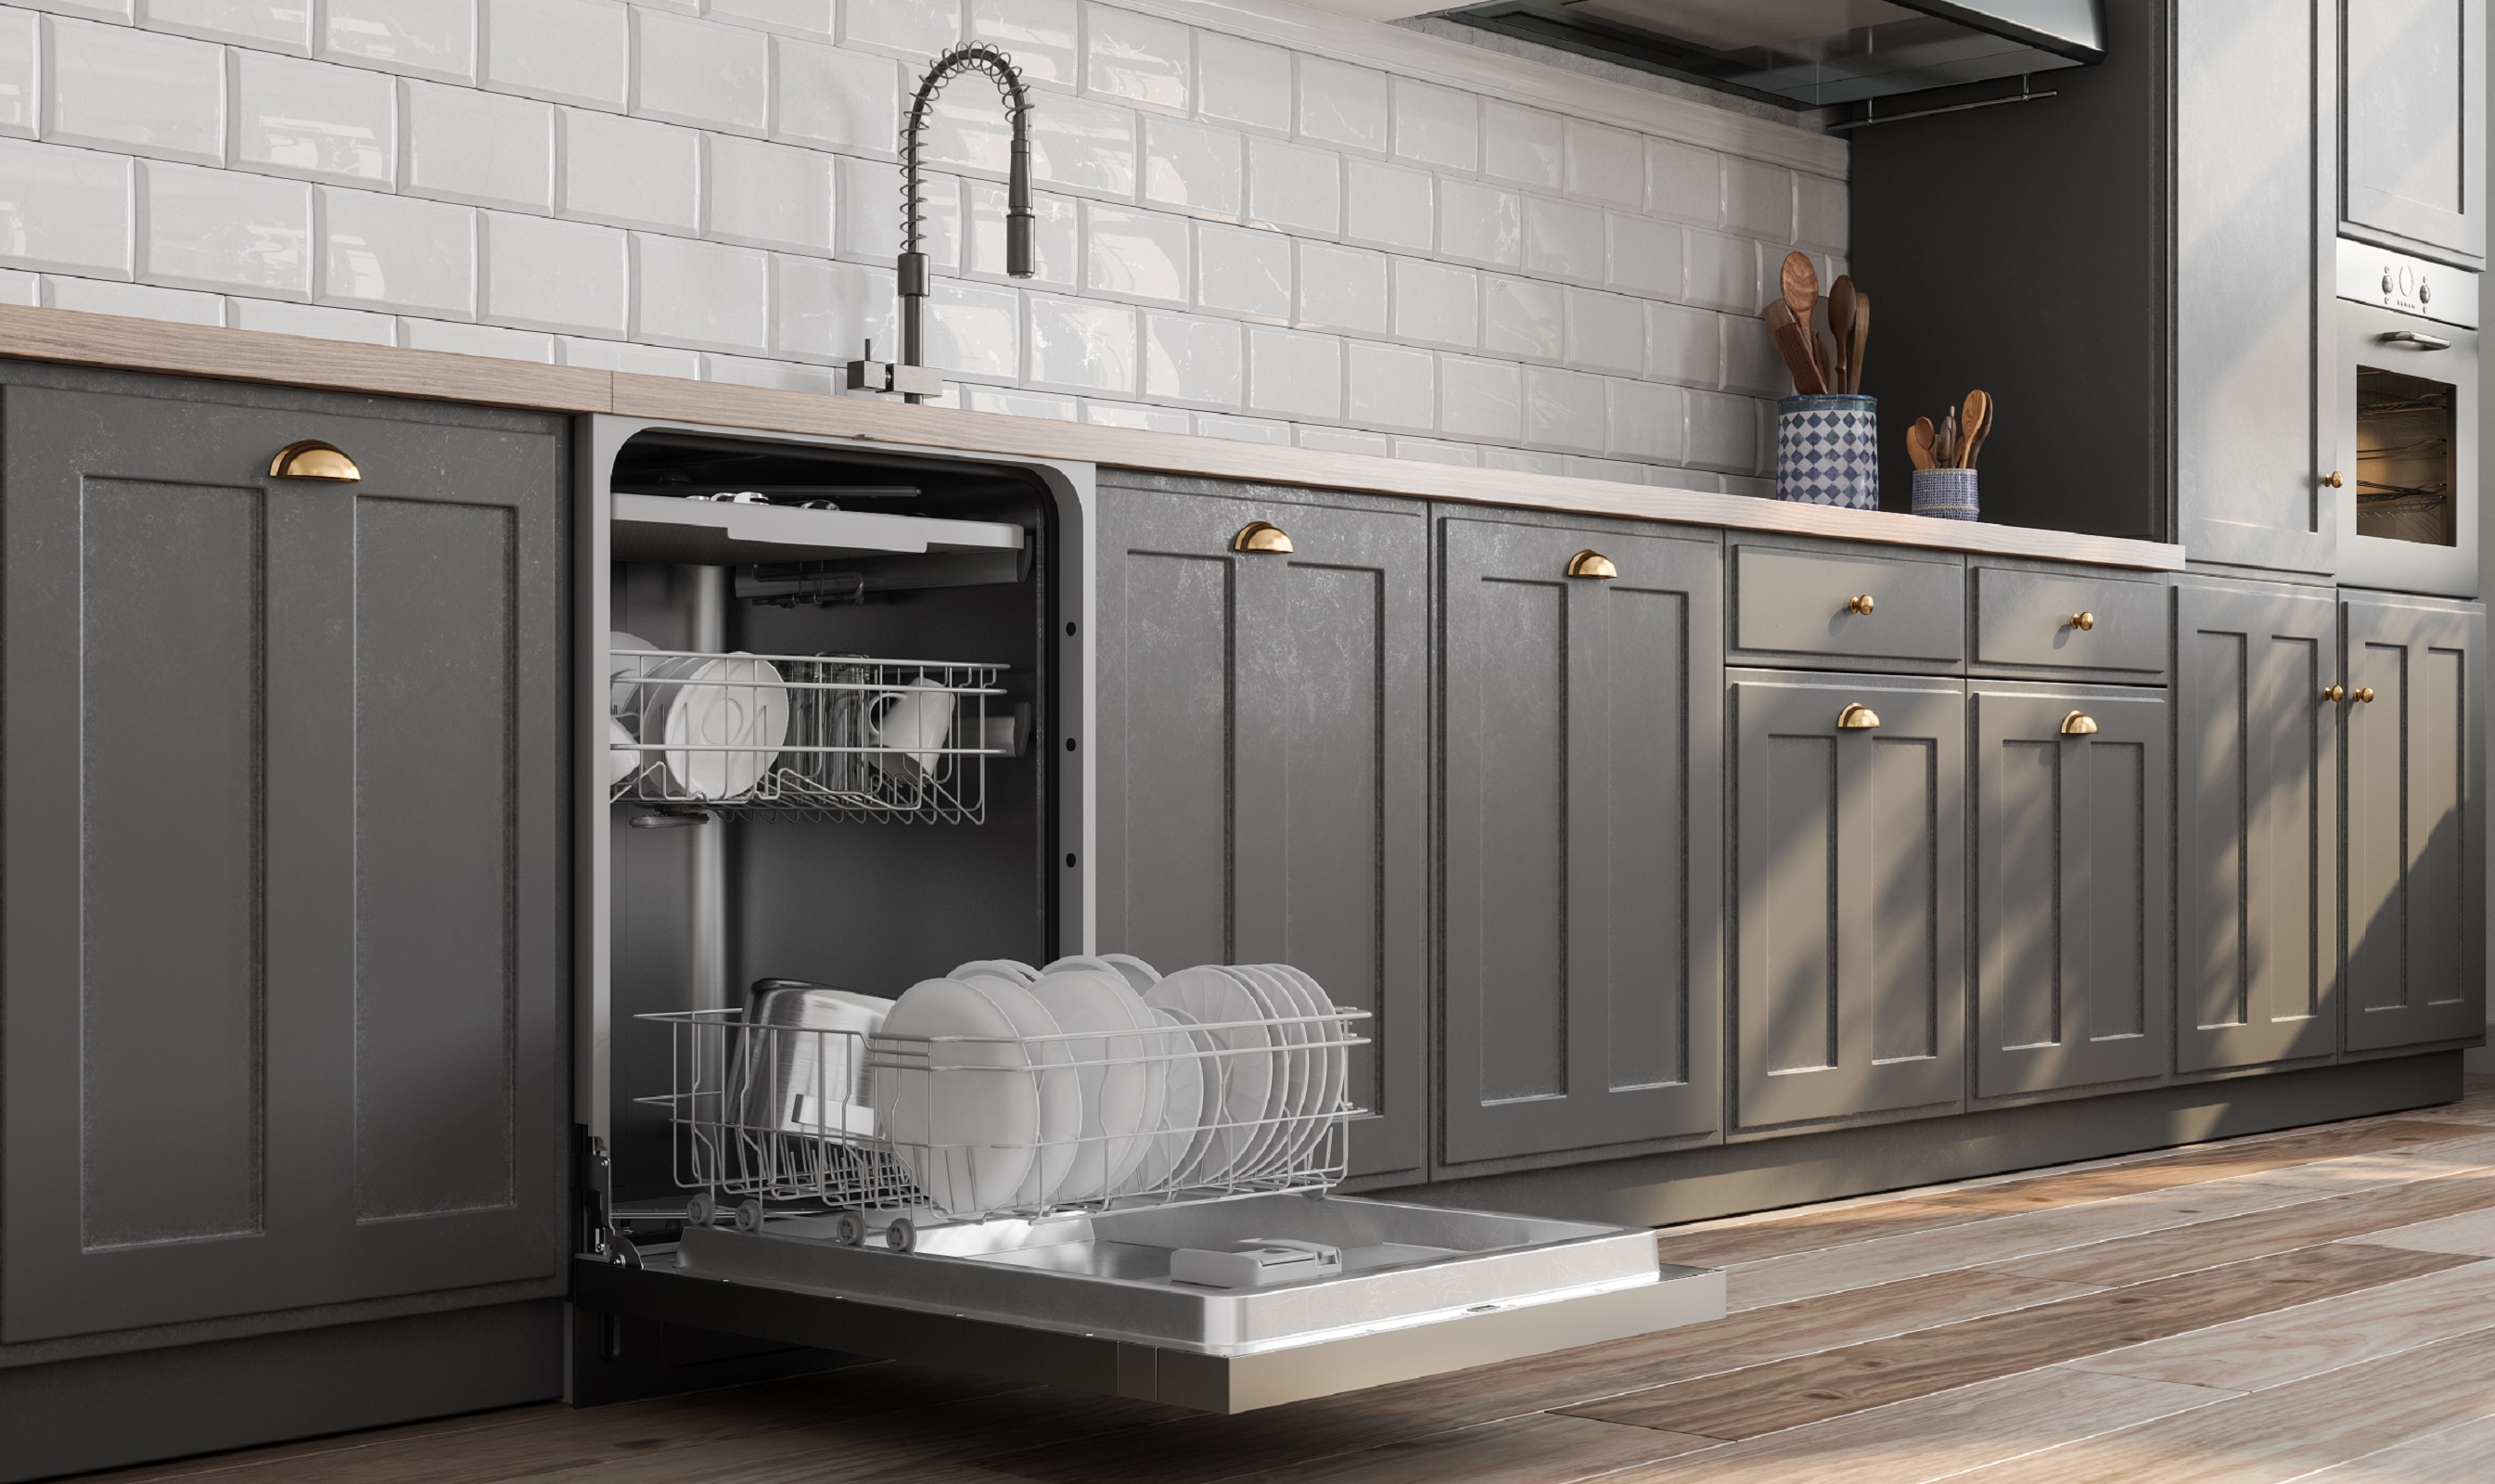 Sale 2023: Tired of cleaning dishes? Get up to 59% off on dishwashers